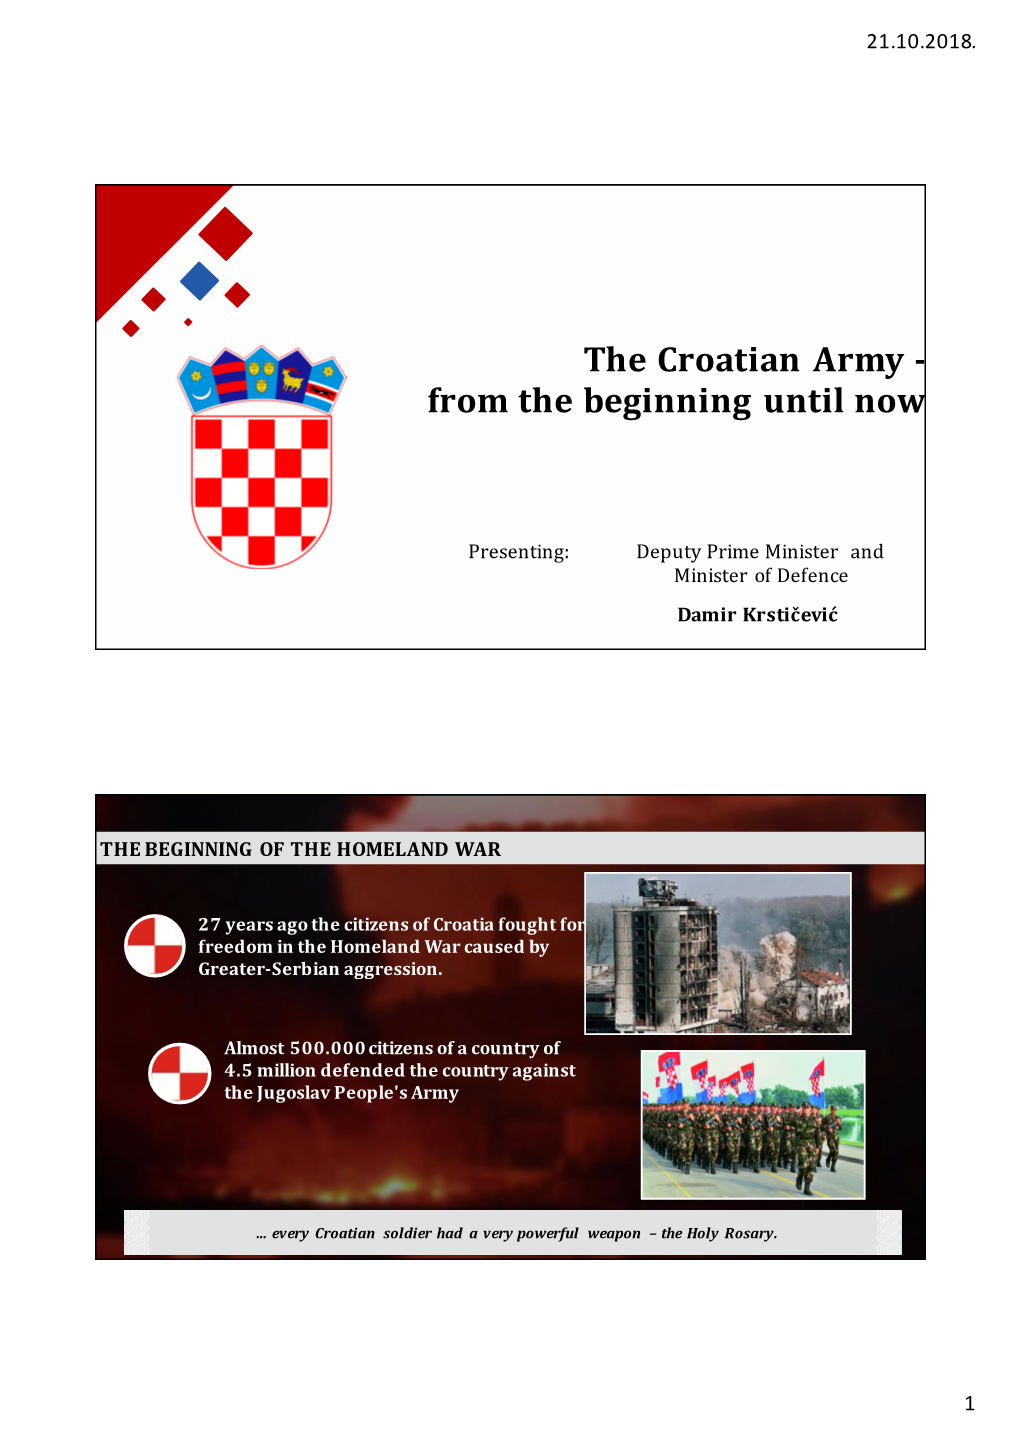 The Croatian Army - from the Beginning Until Now